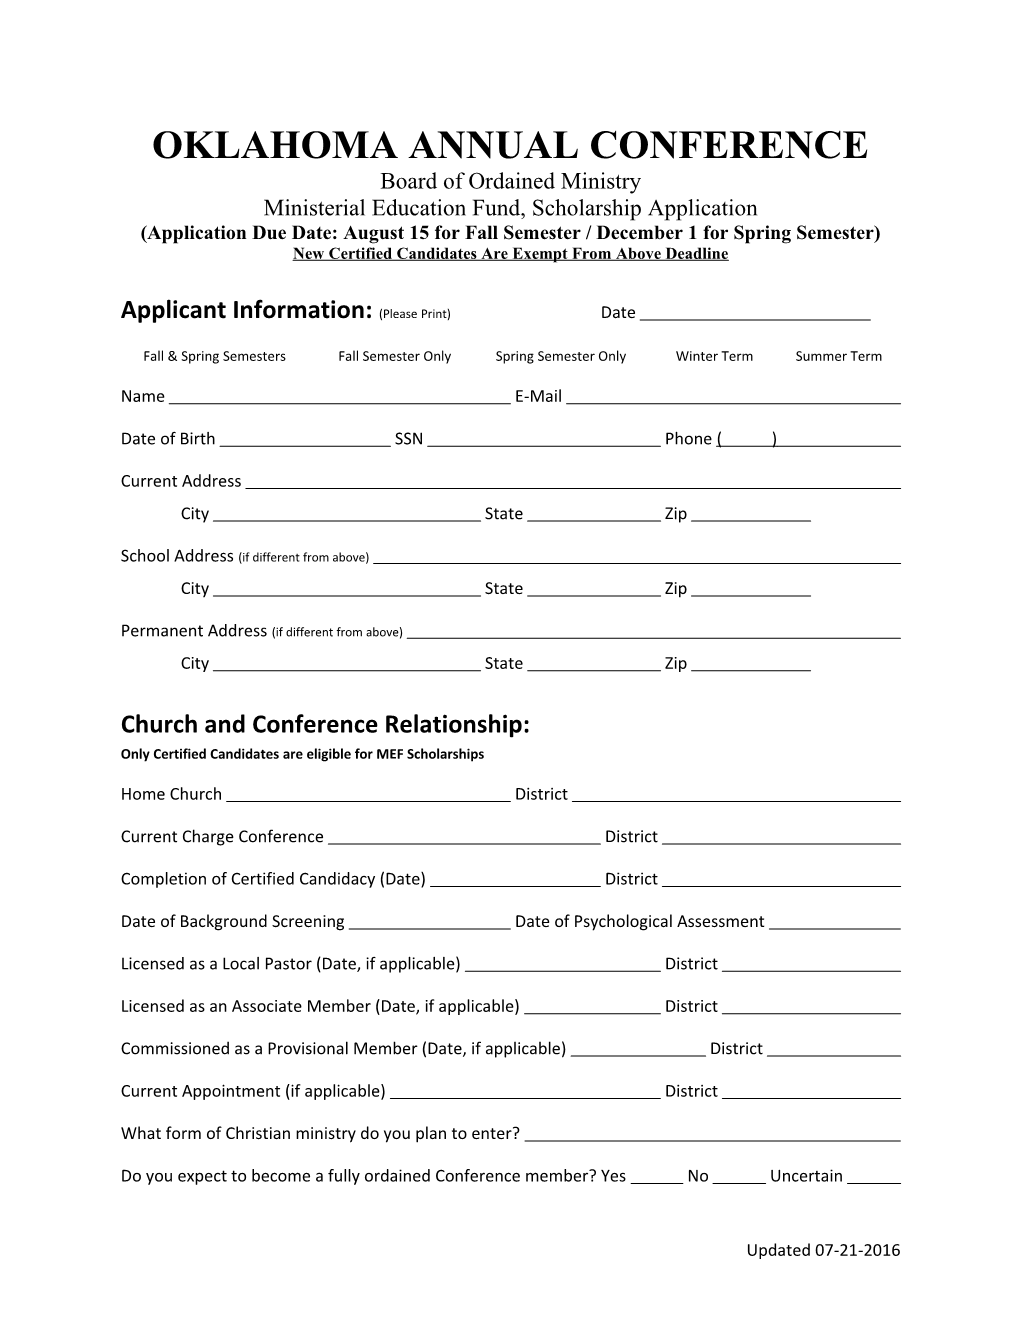 Oklahoma Annual Conference